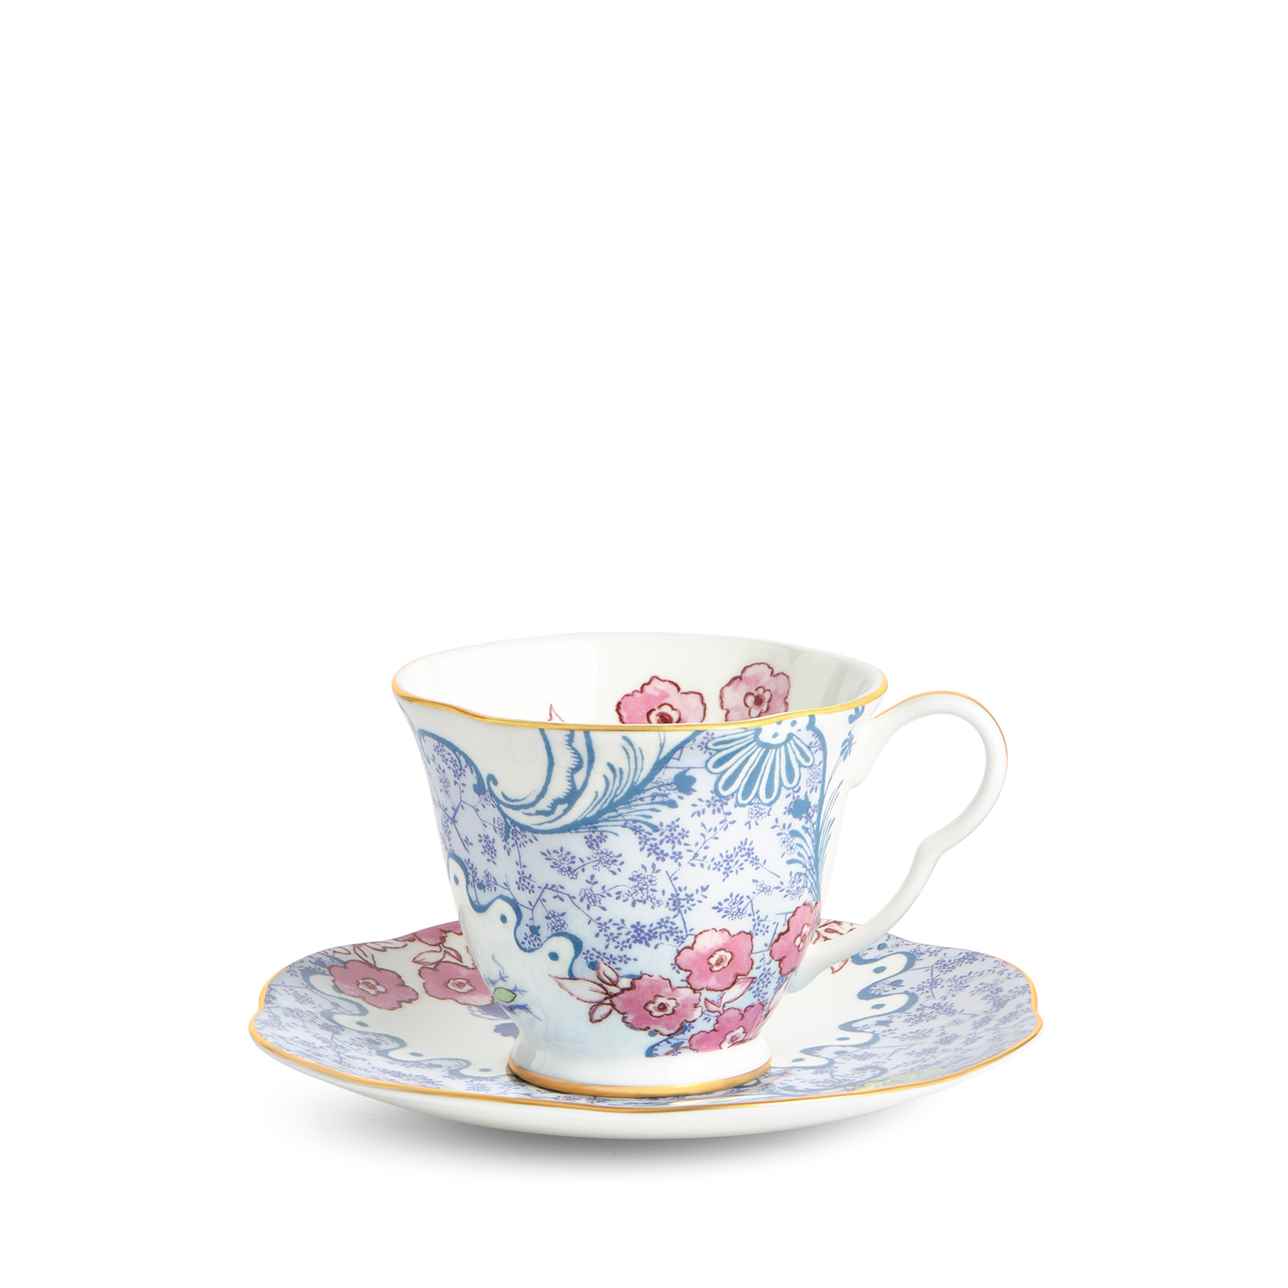 Butterfly Bloom Blue and Pink Teacup and Saucer